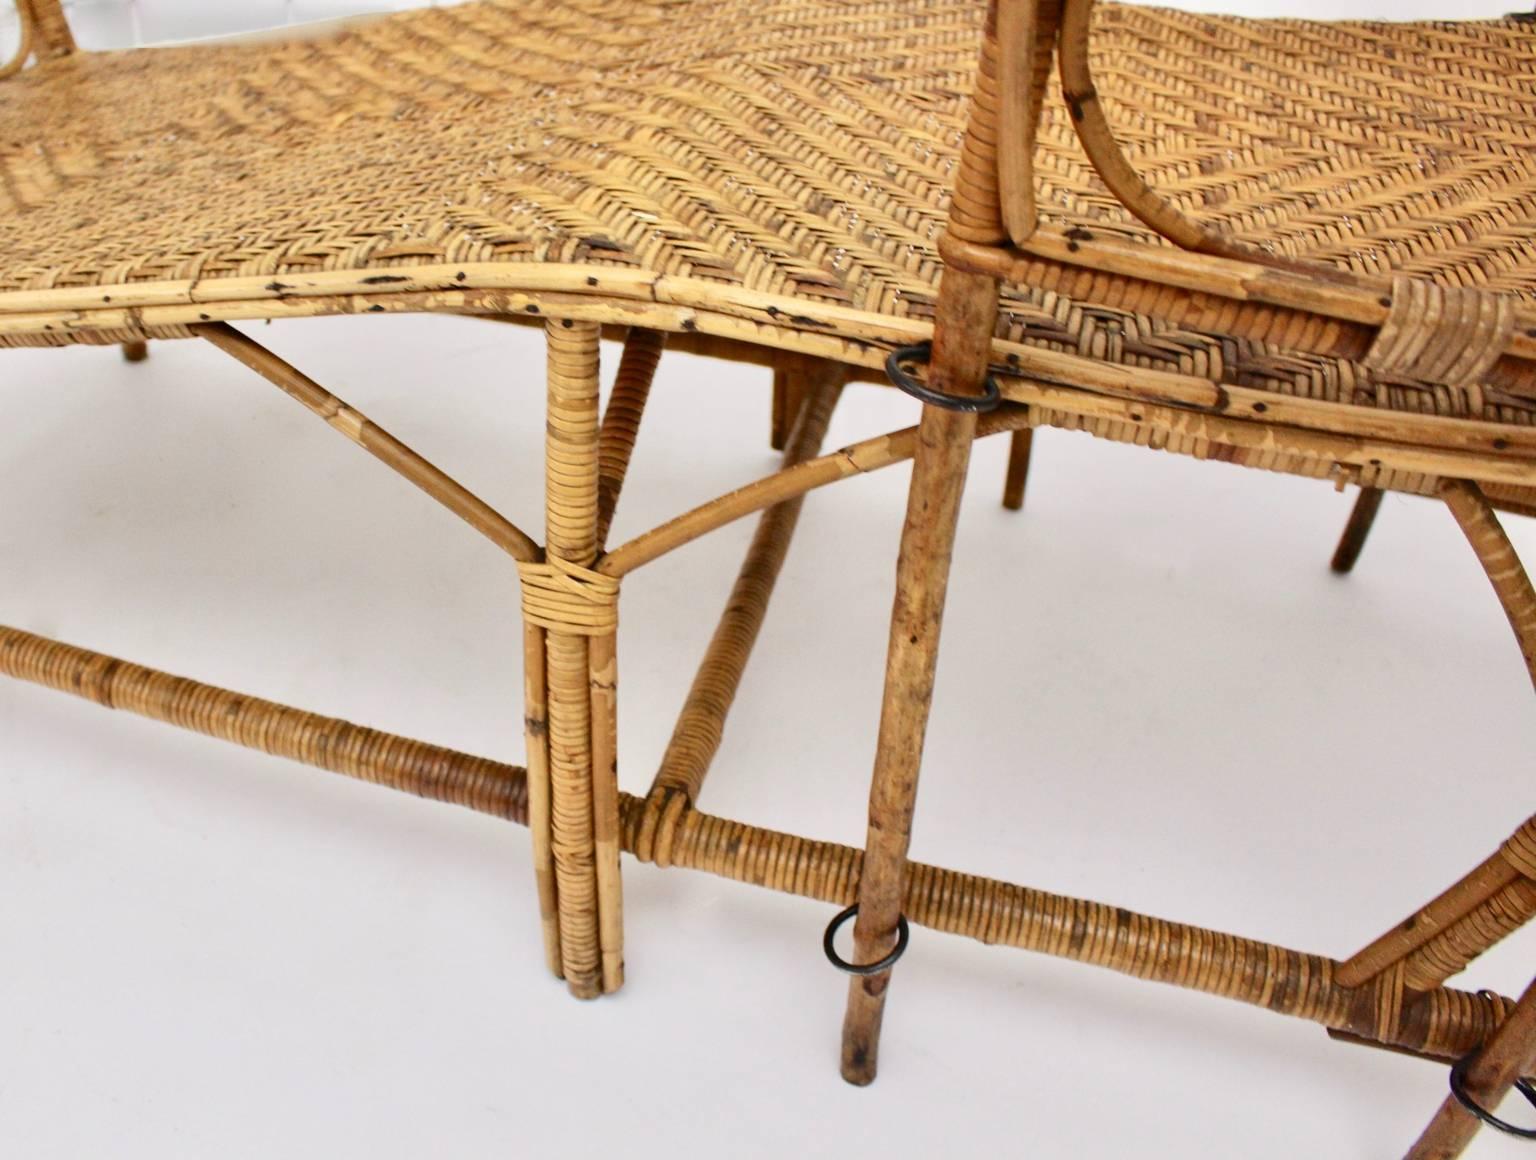 Rattan Art Deco Vintage Chaise Longue by Perret & Vibert Attributed France 1920s For Sale 5